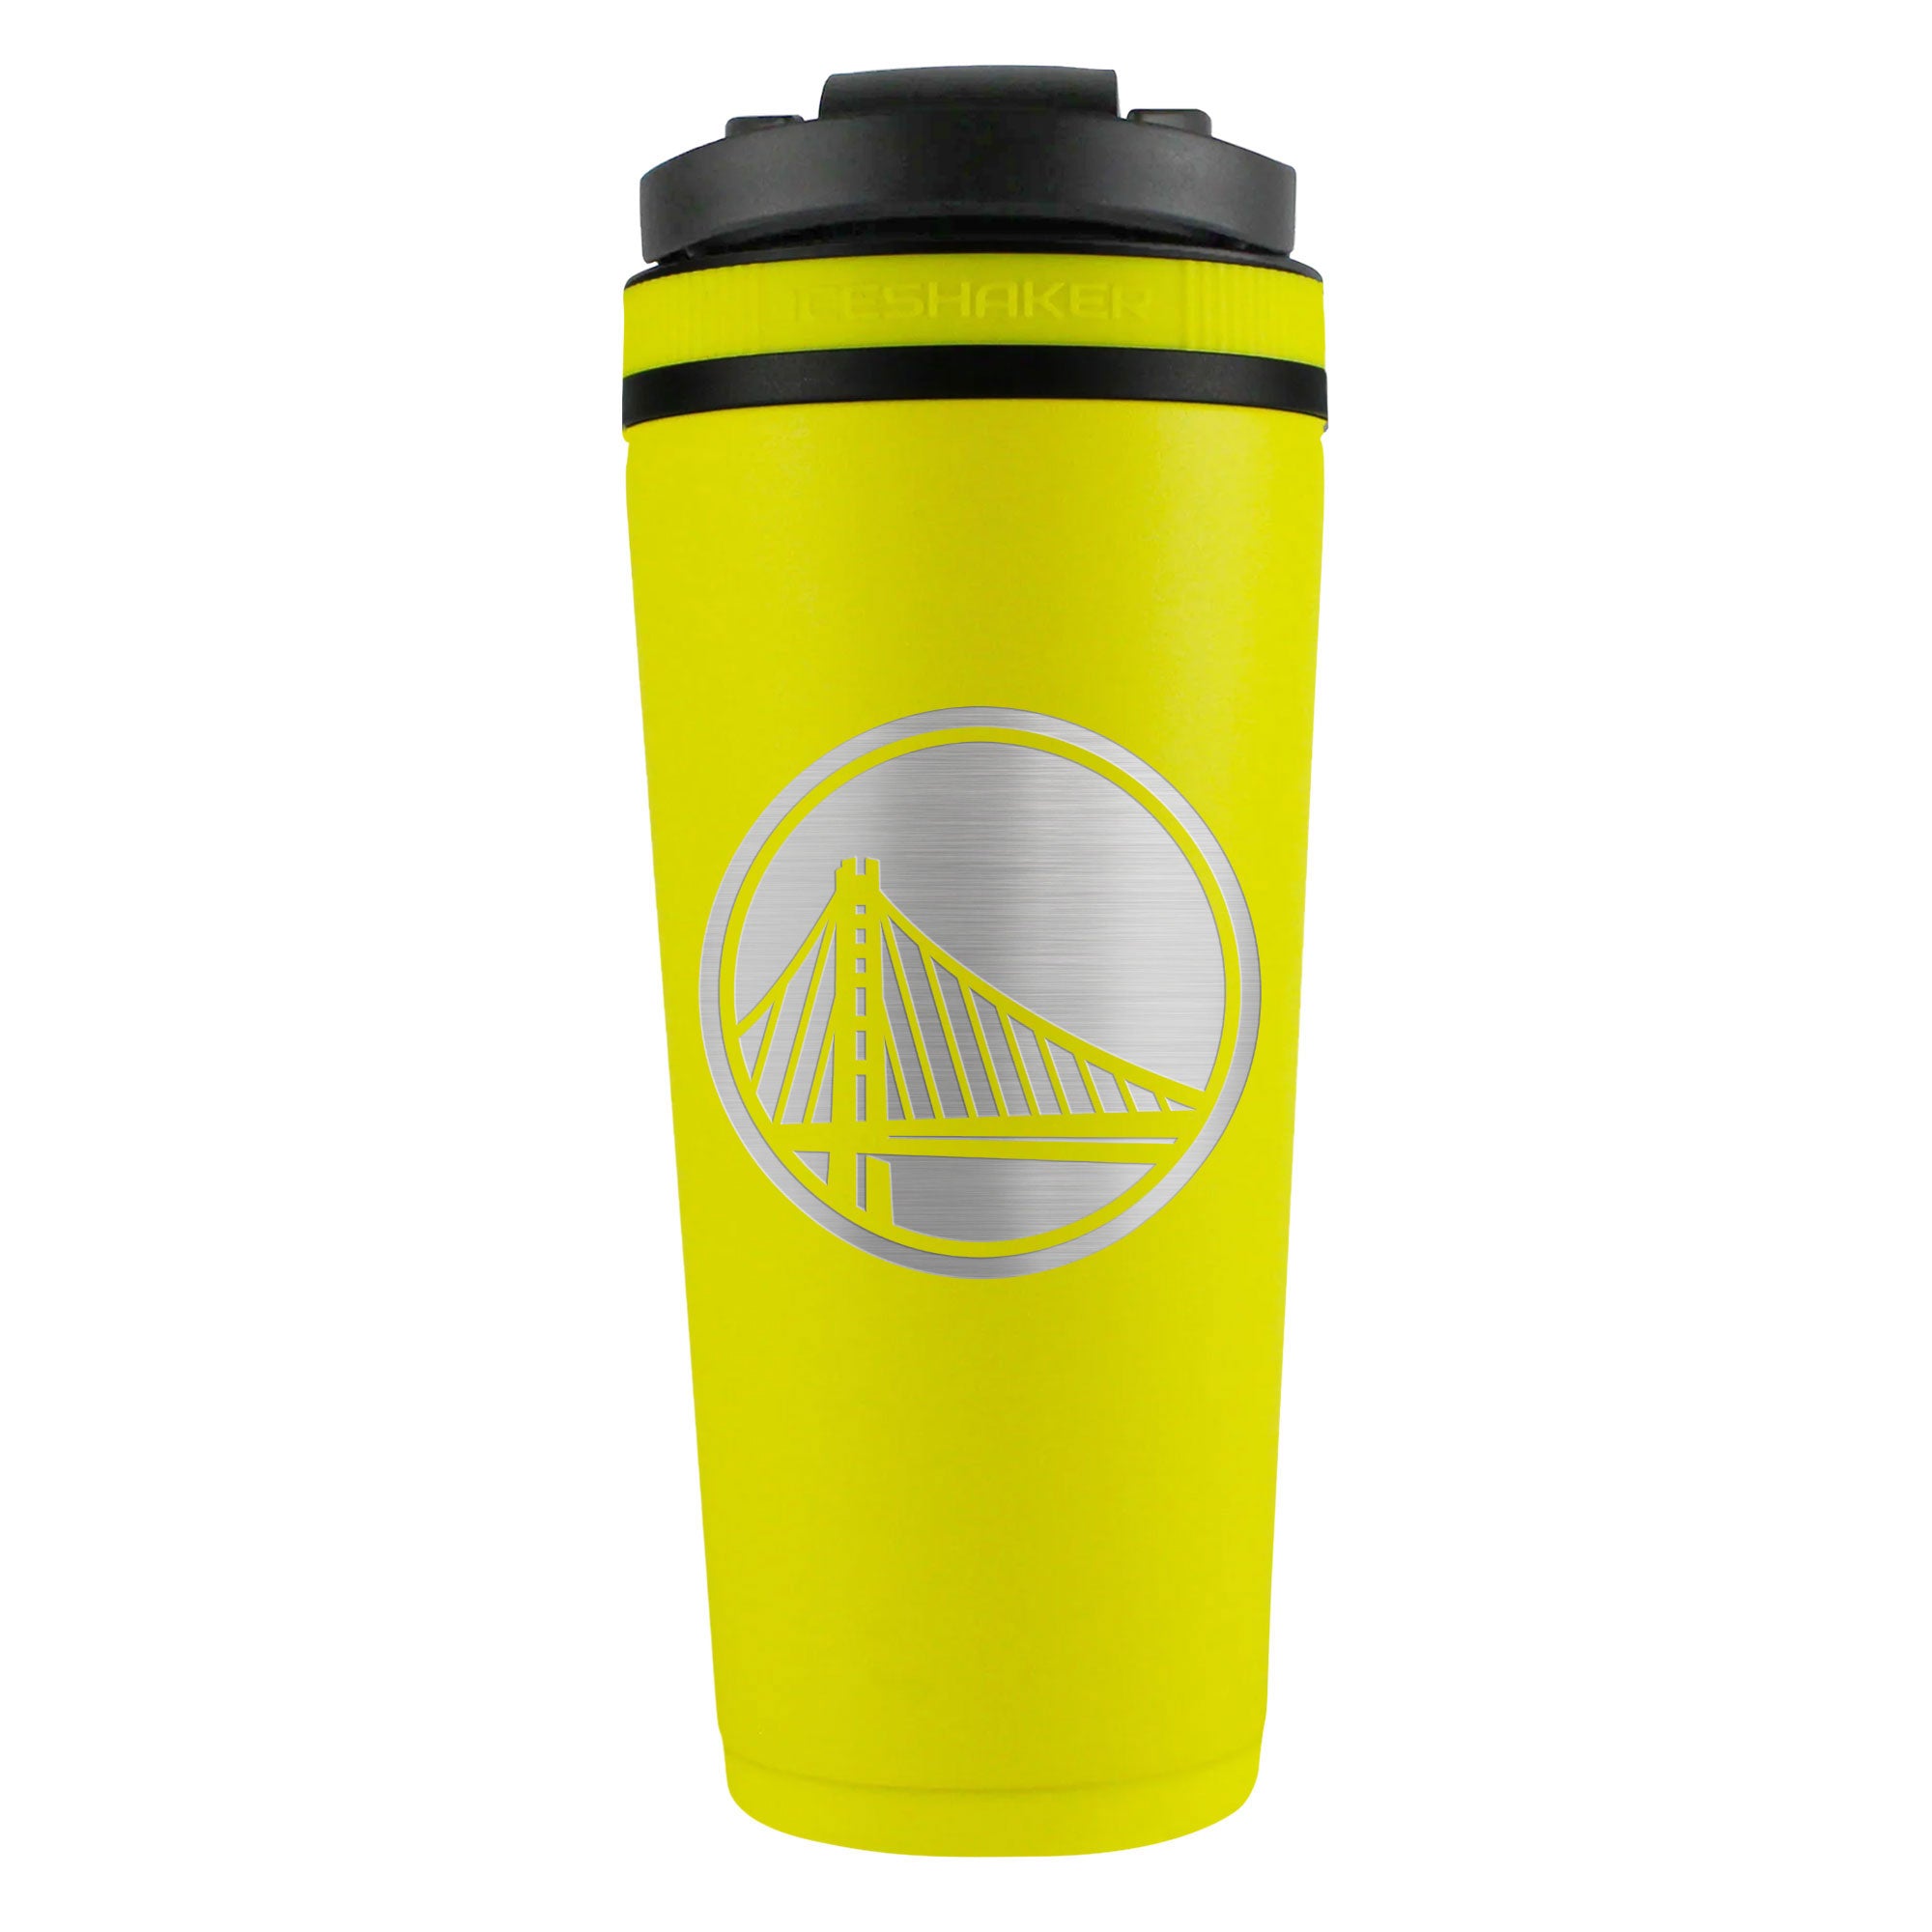 Officially Licensed Golden State Warriors 26oz Ice Shaker - Yellow